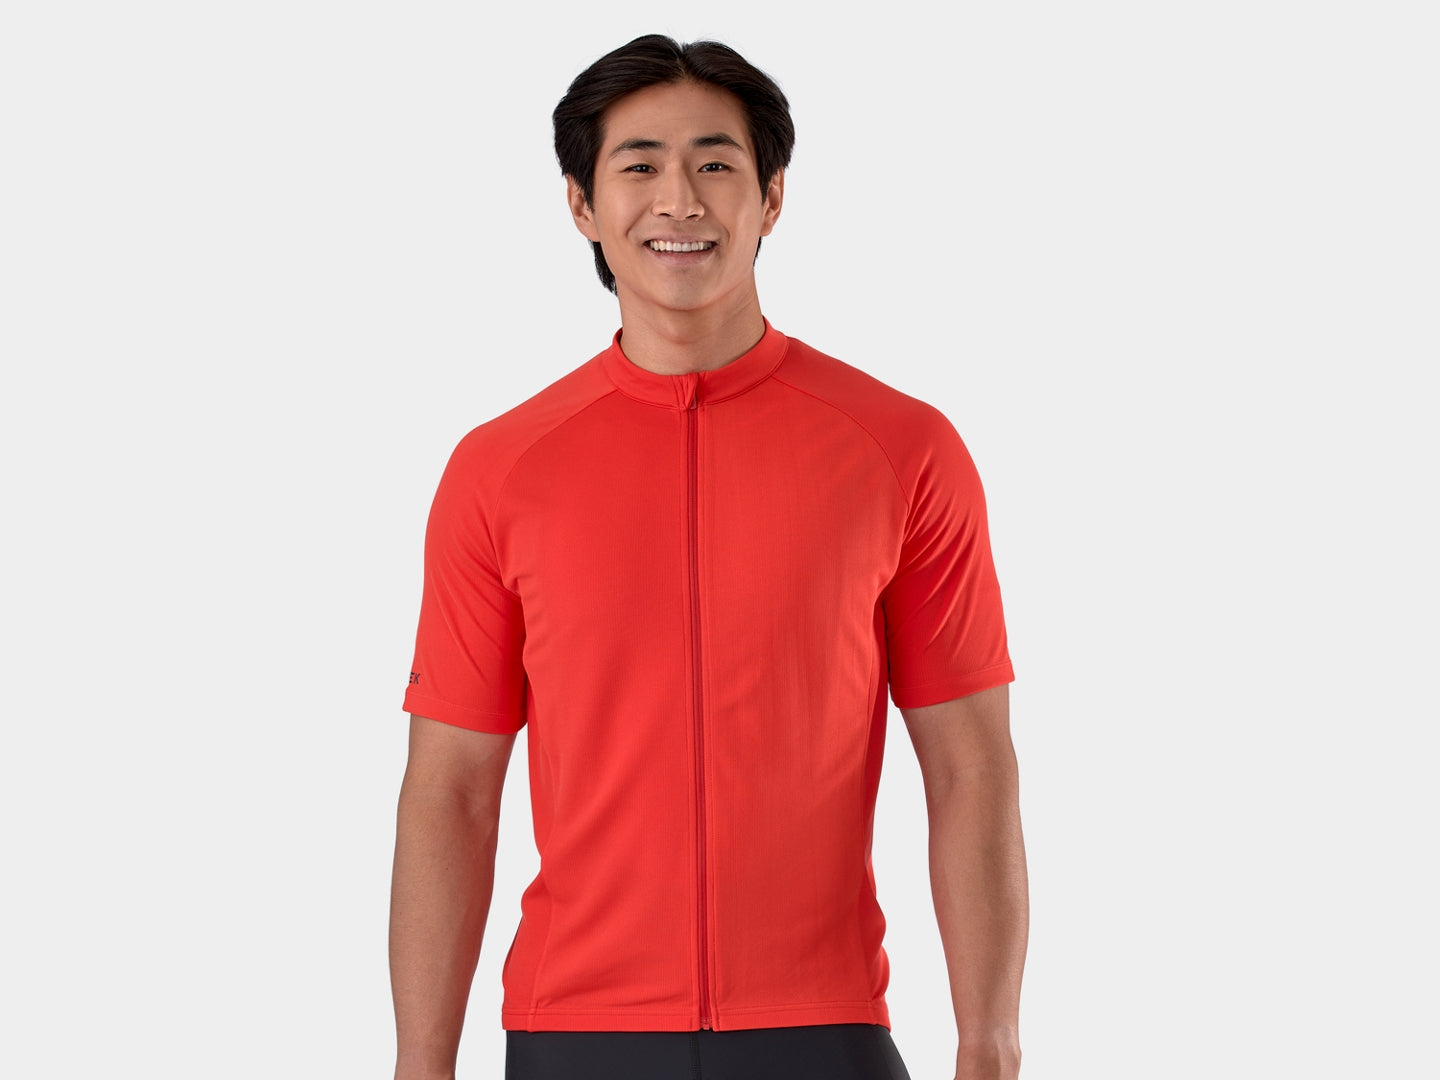 Trek Solstice Cycling Jersey- Cycling Jersey- Men's Cycling Jersey- Men's Apparel